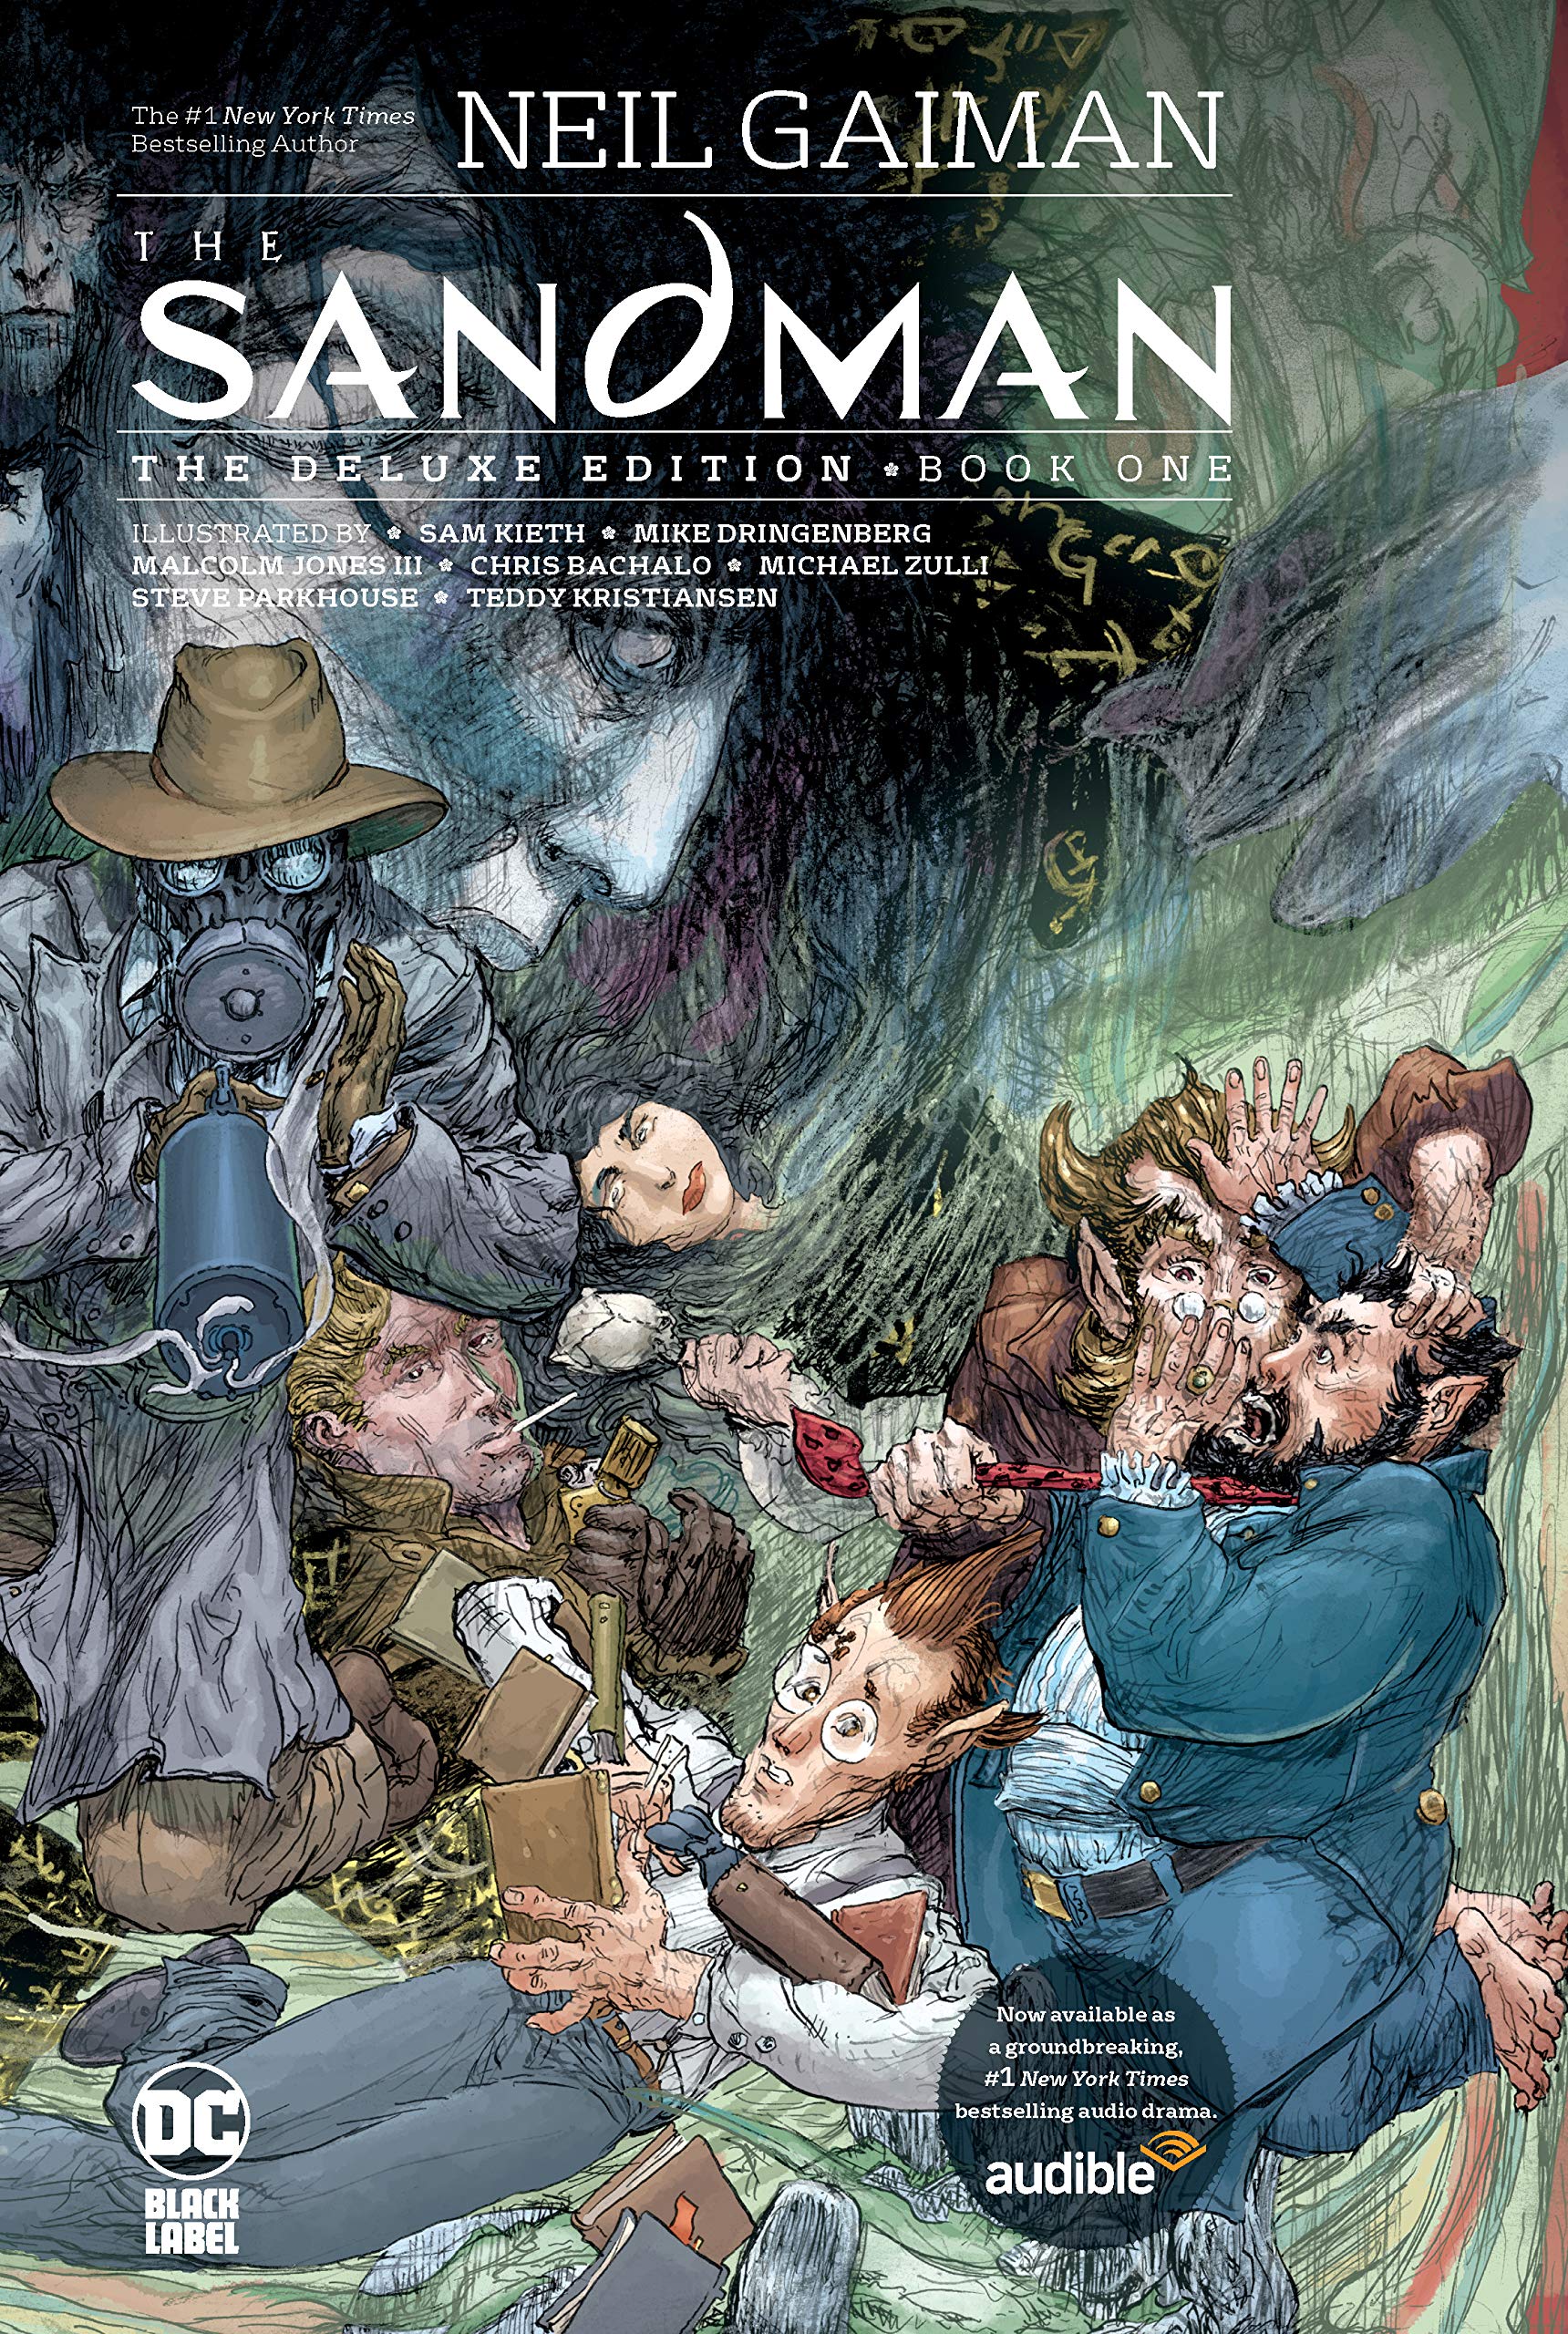 The Sandman: Deluxe Edition volumes 1-4 $11.99 each kindle comixology $12.75